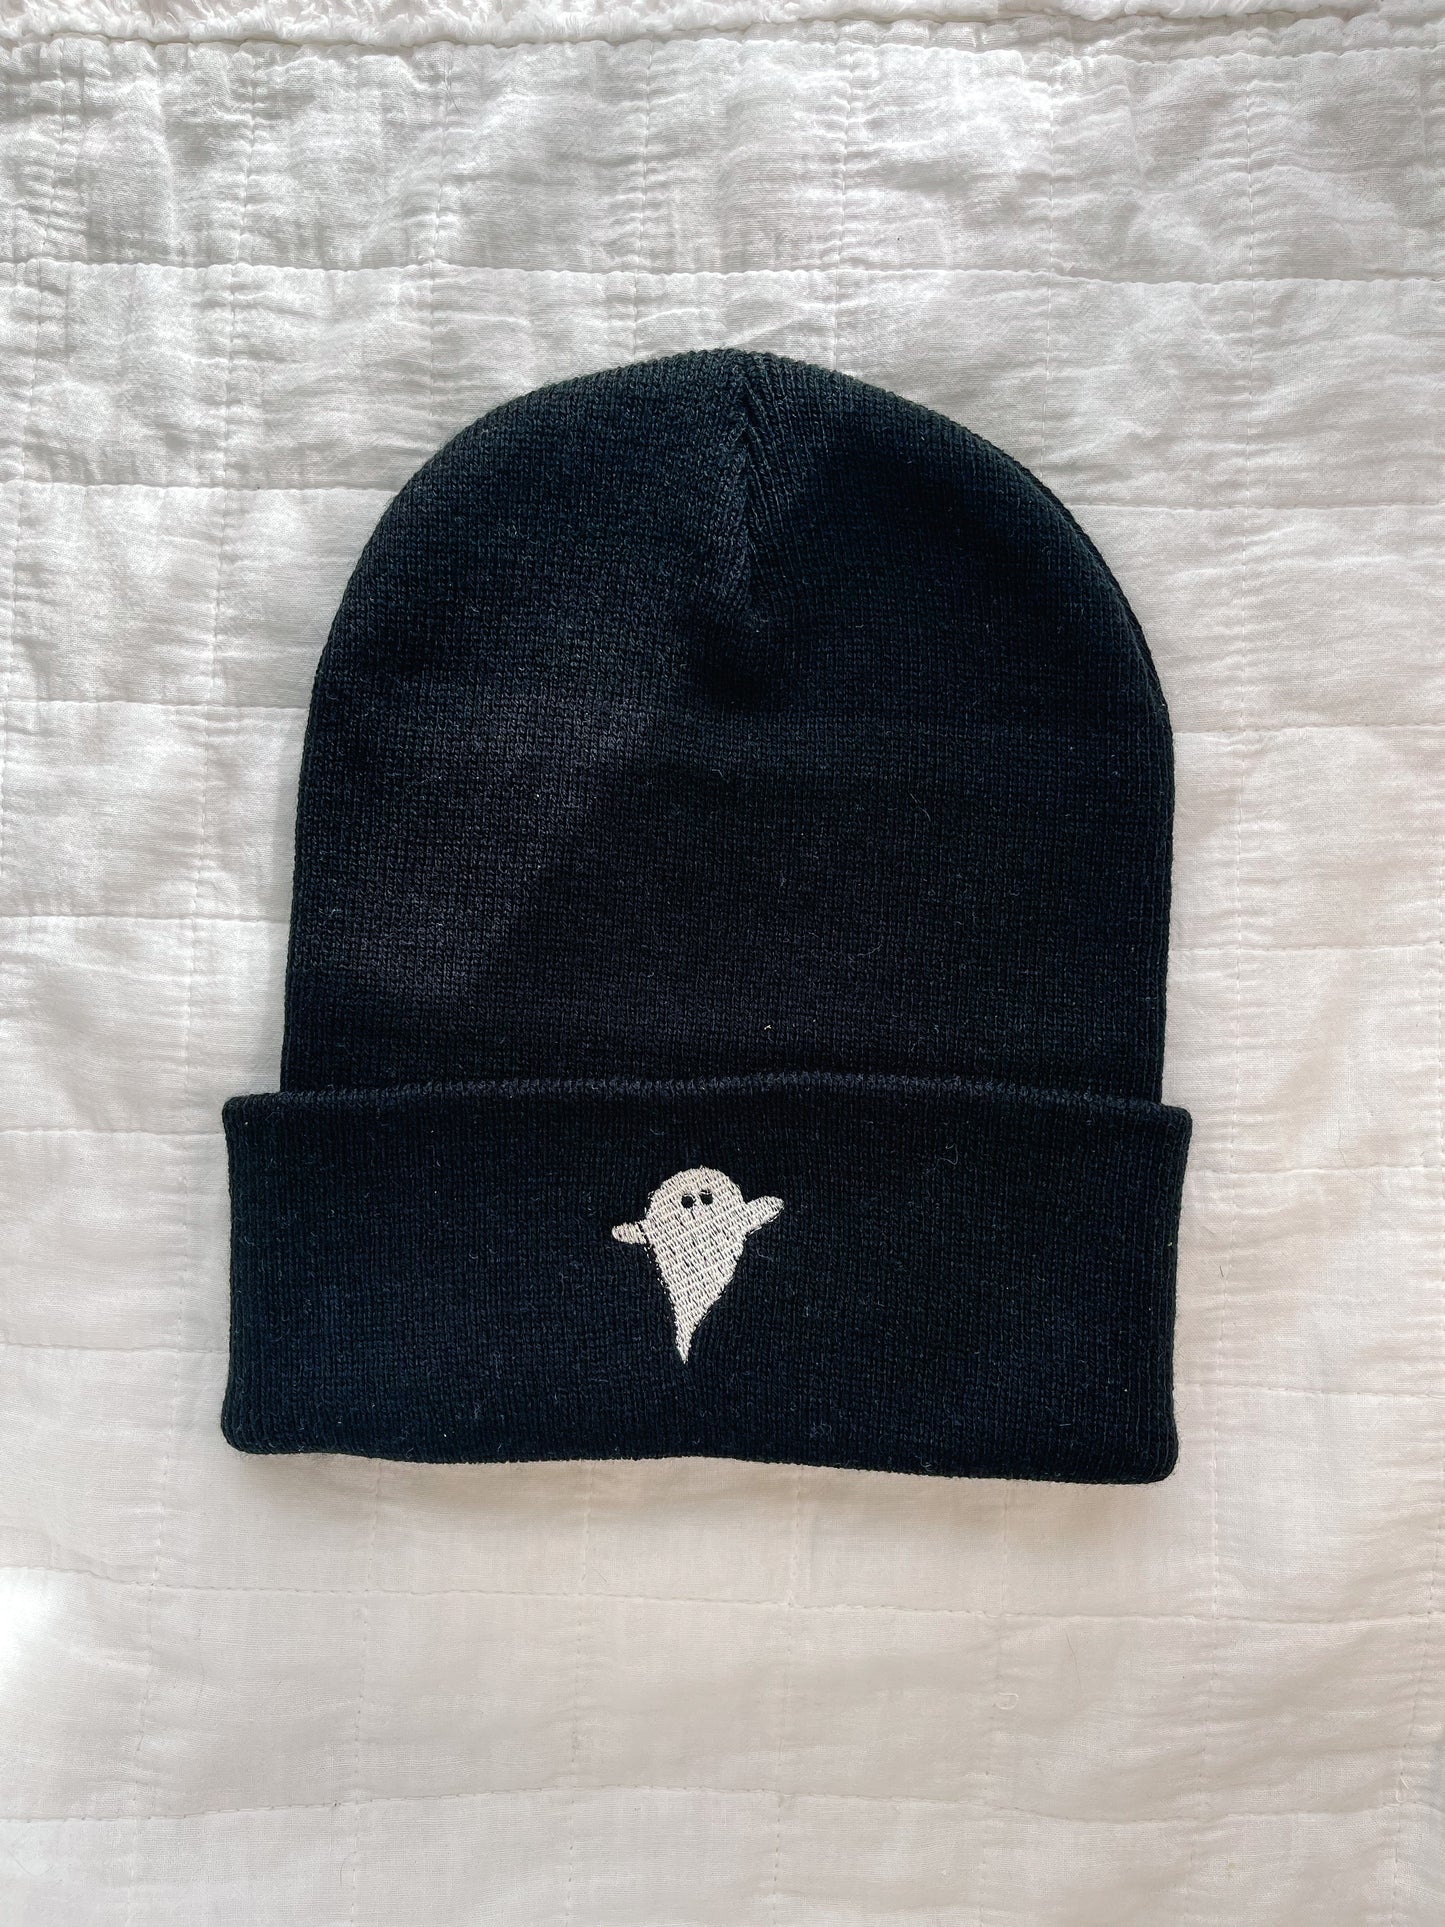 Embroidered Adult Beanie